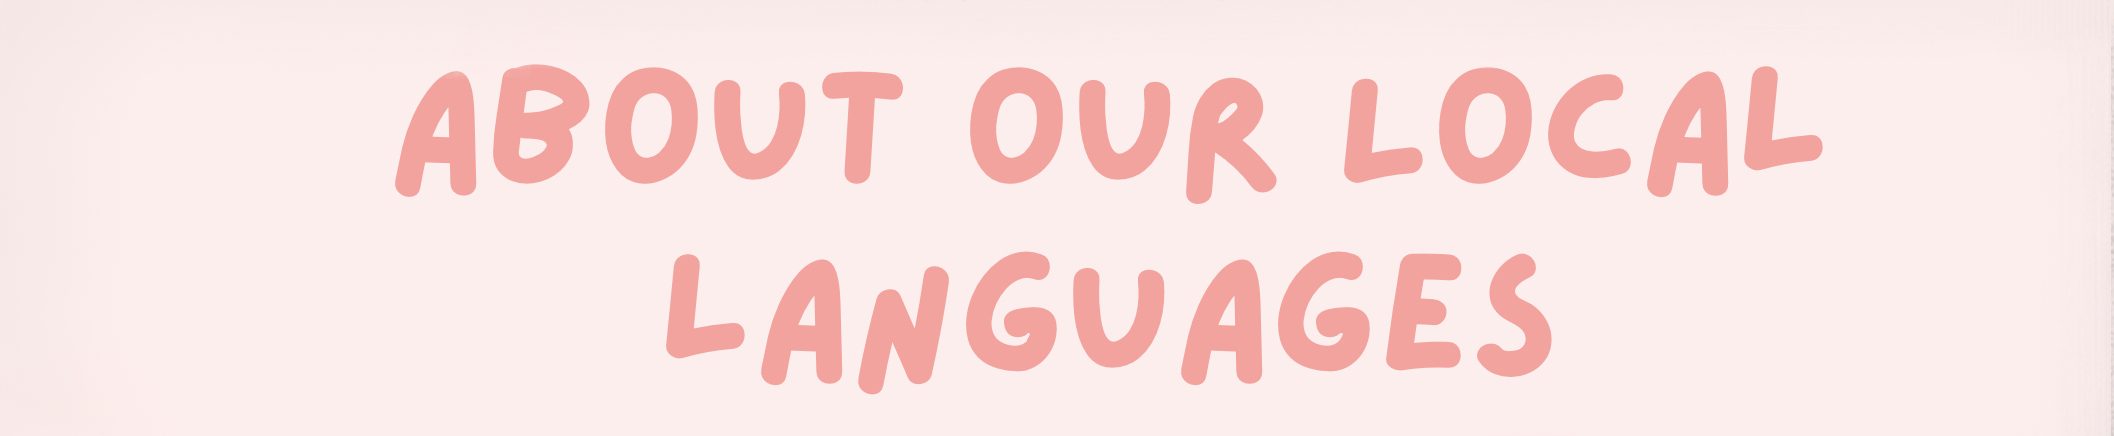 About our local languages header